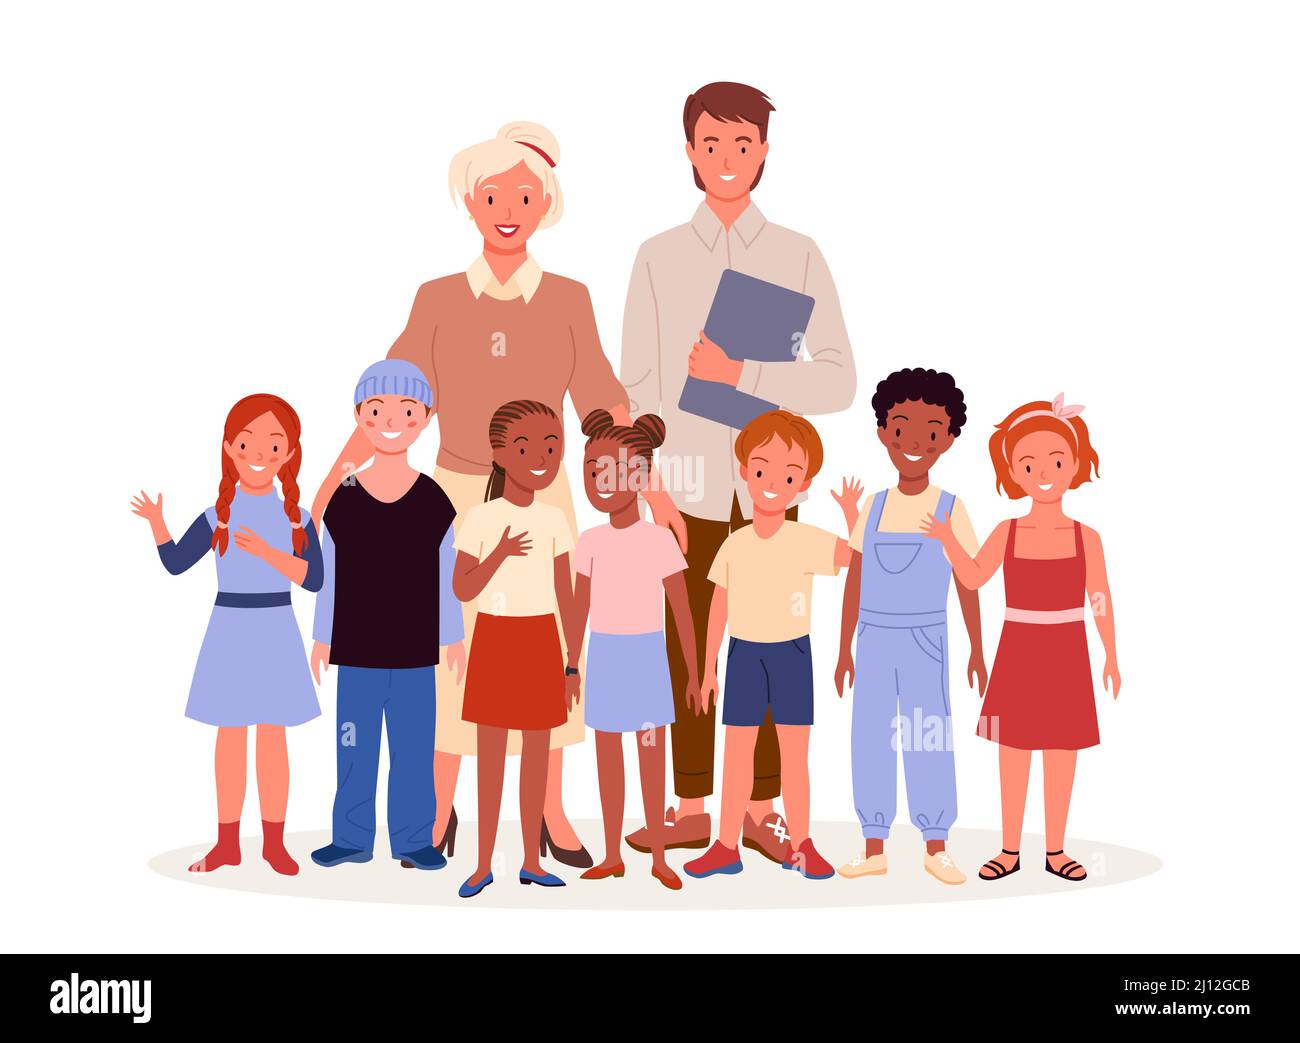 Cartoon female educator standing with happy young students, group of cute kids smiling and cheerful pupils waving with fun. Primary education concept Stock Vector